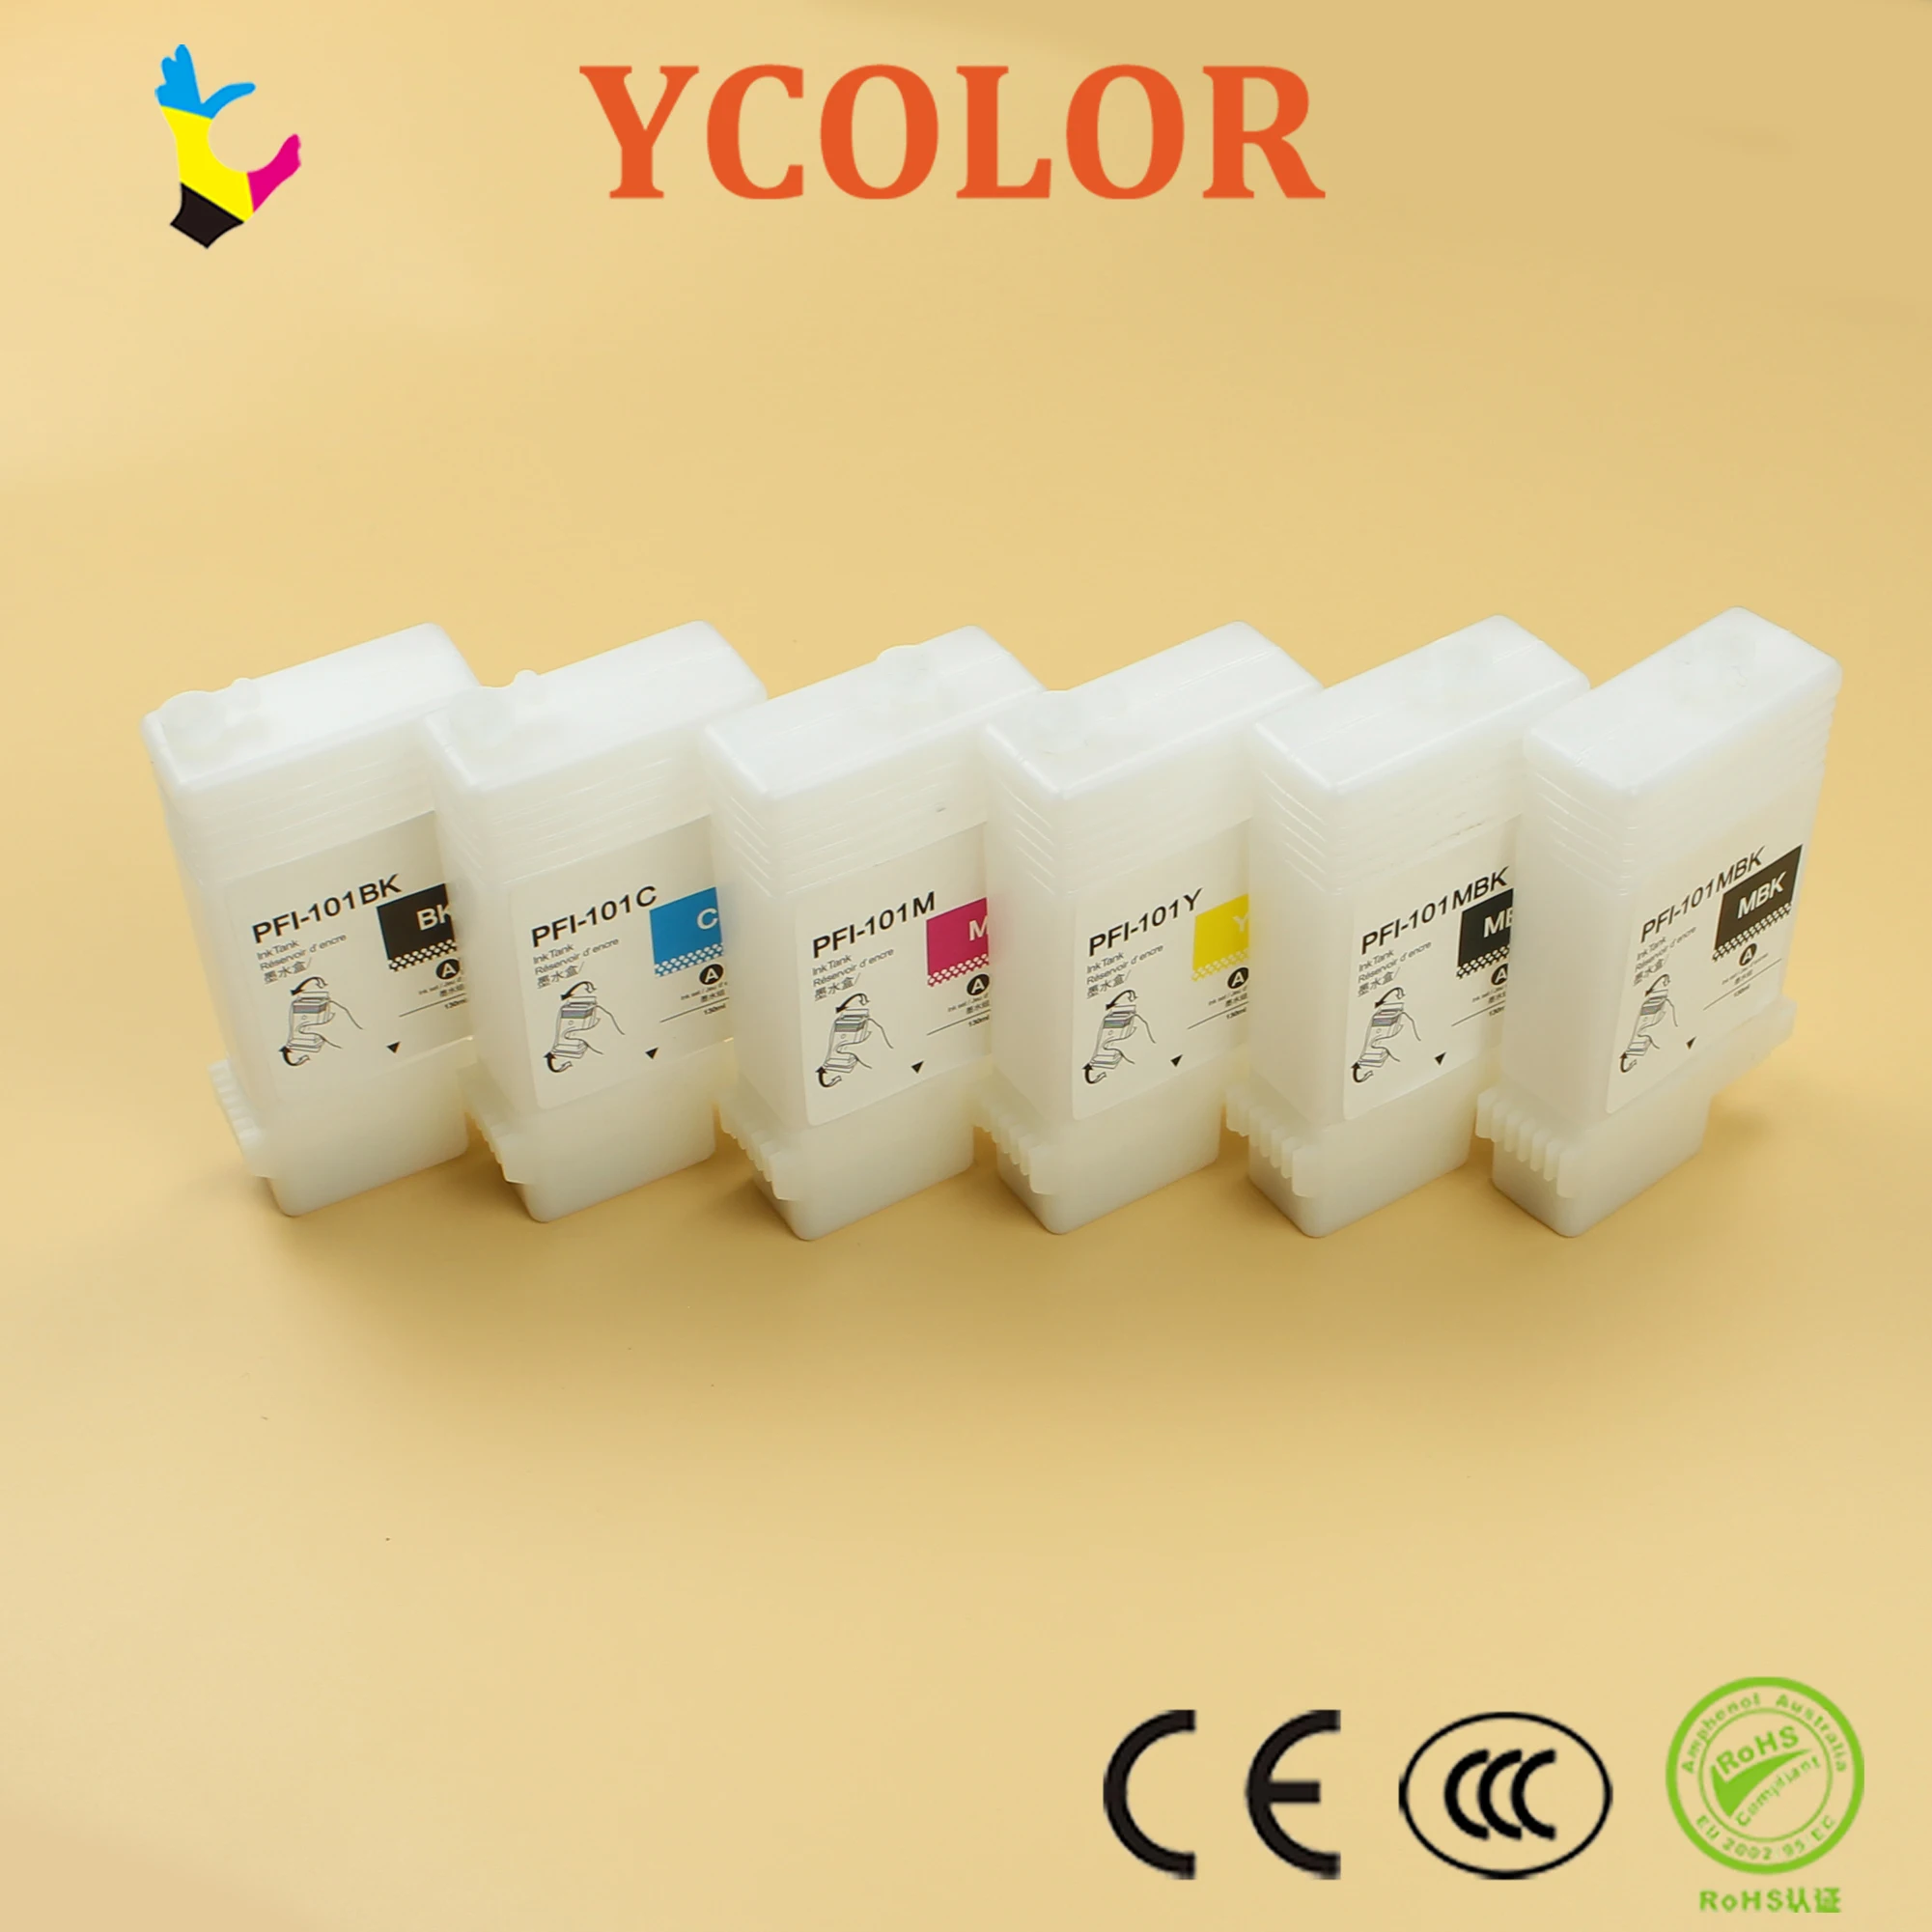 

Free shipping !! 6color 130ml Refill Ink Cartridge with PFI 107 chip for Canon IPF670 IPF 680 IPF 685 IPF 770 IPF 780 IPF 785